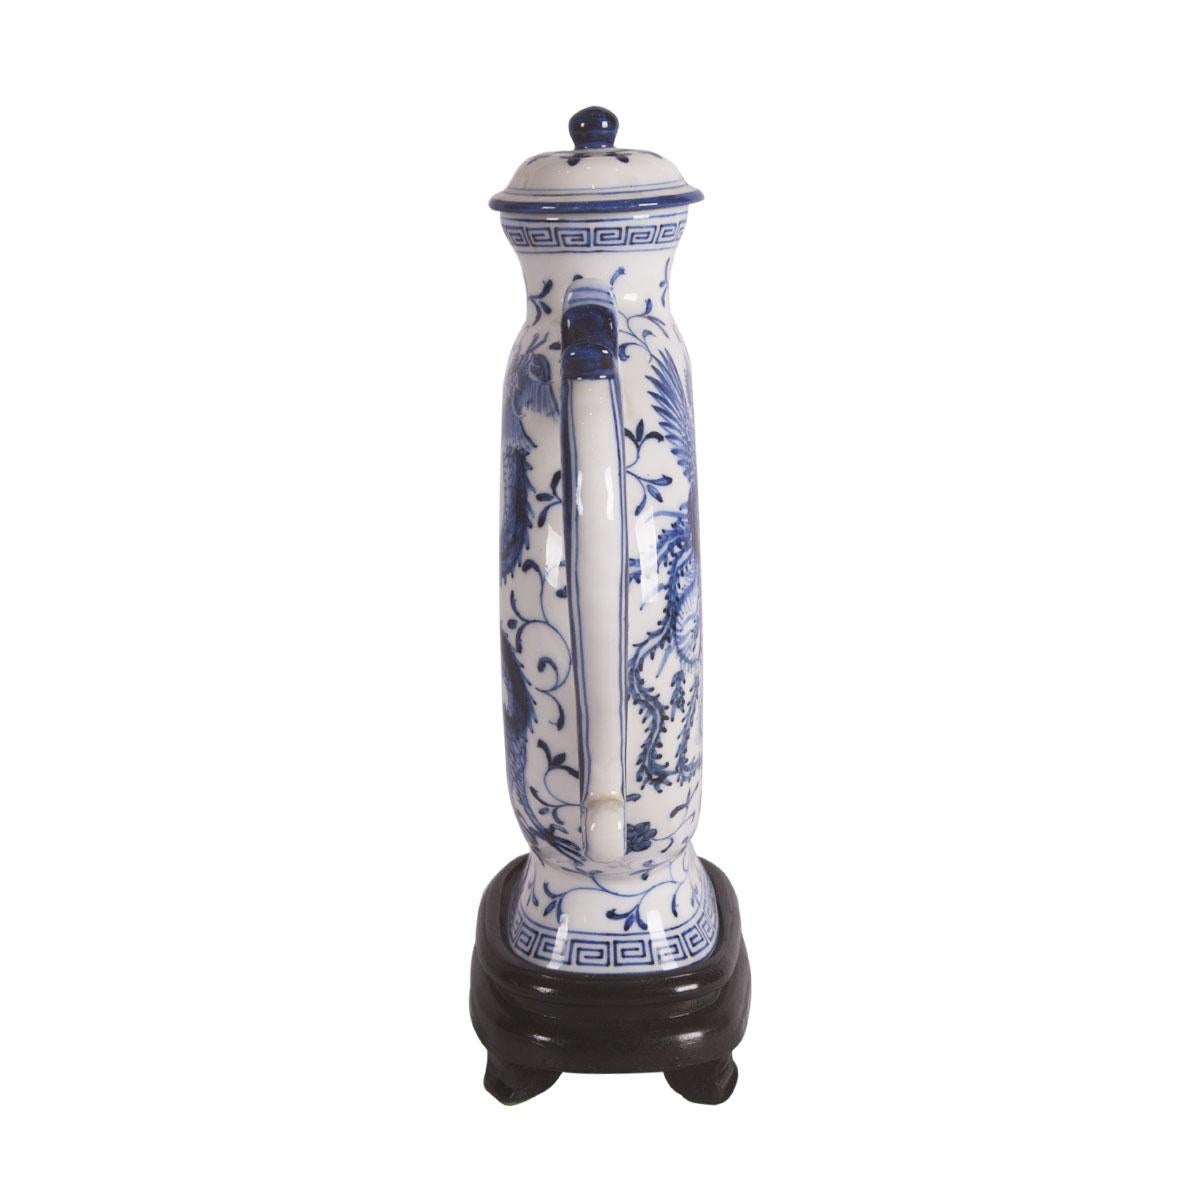 Made of porcelain, this Chinese wine pot is from the late 1950s and has traditional blue hand painted dragon designs through out the pot with stamping at the bottom of the wine pot. It also includes the matching wooden stand. Pot measures 11.50